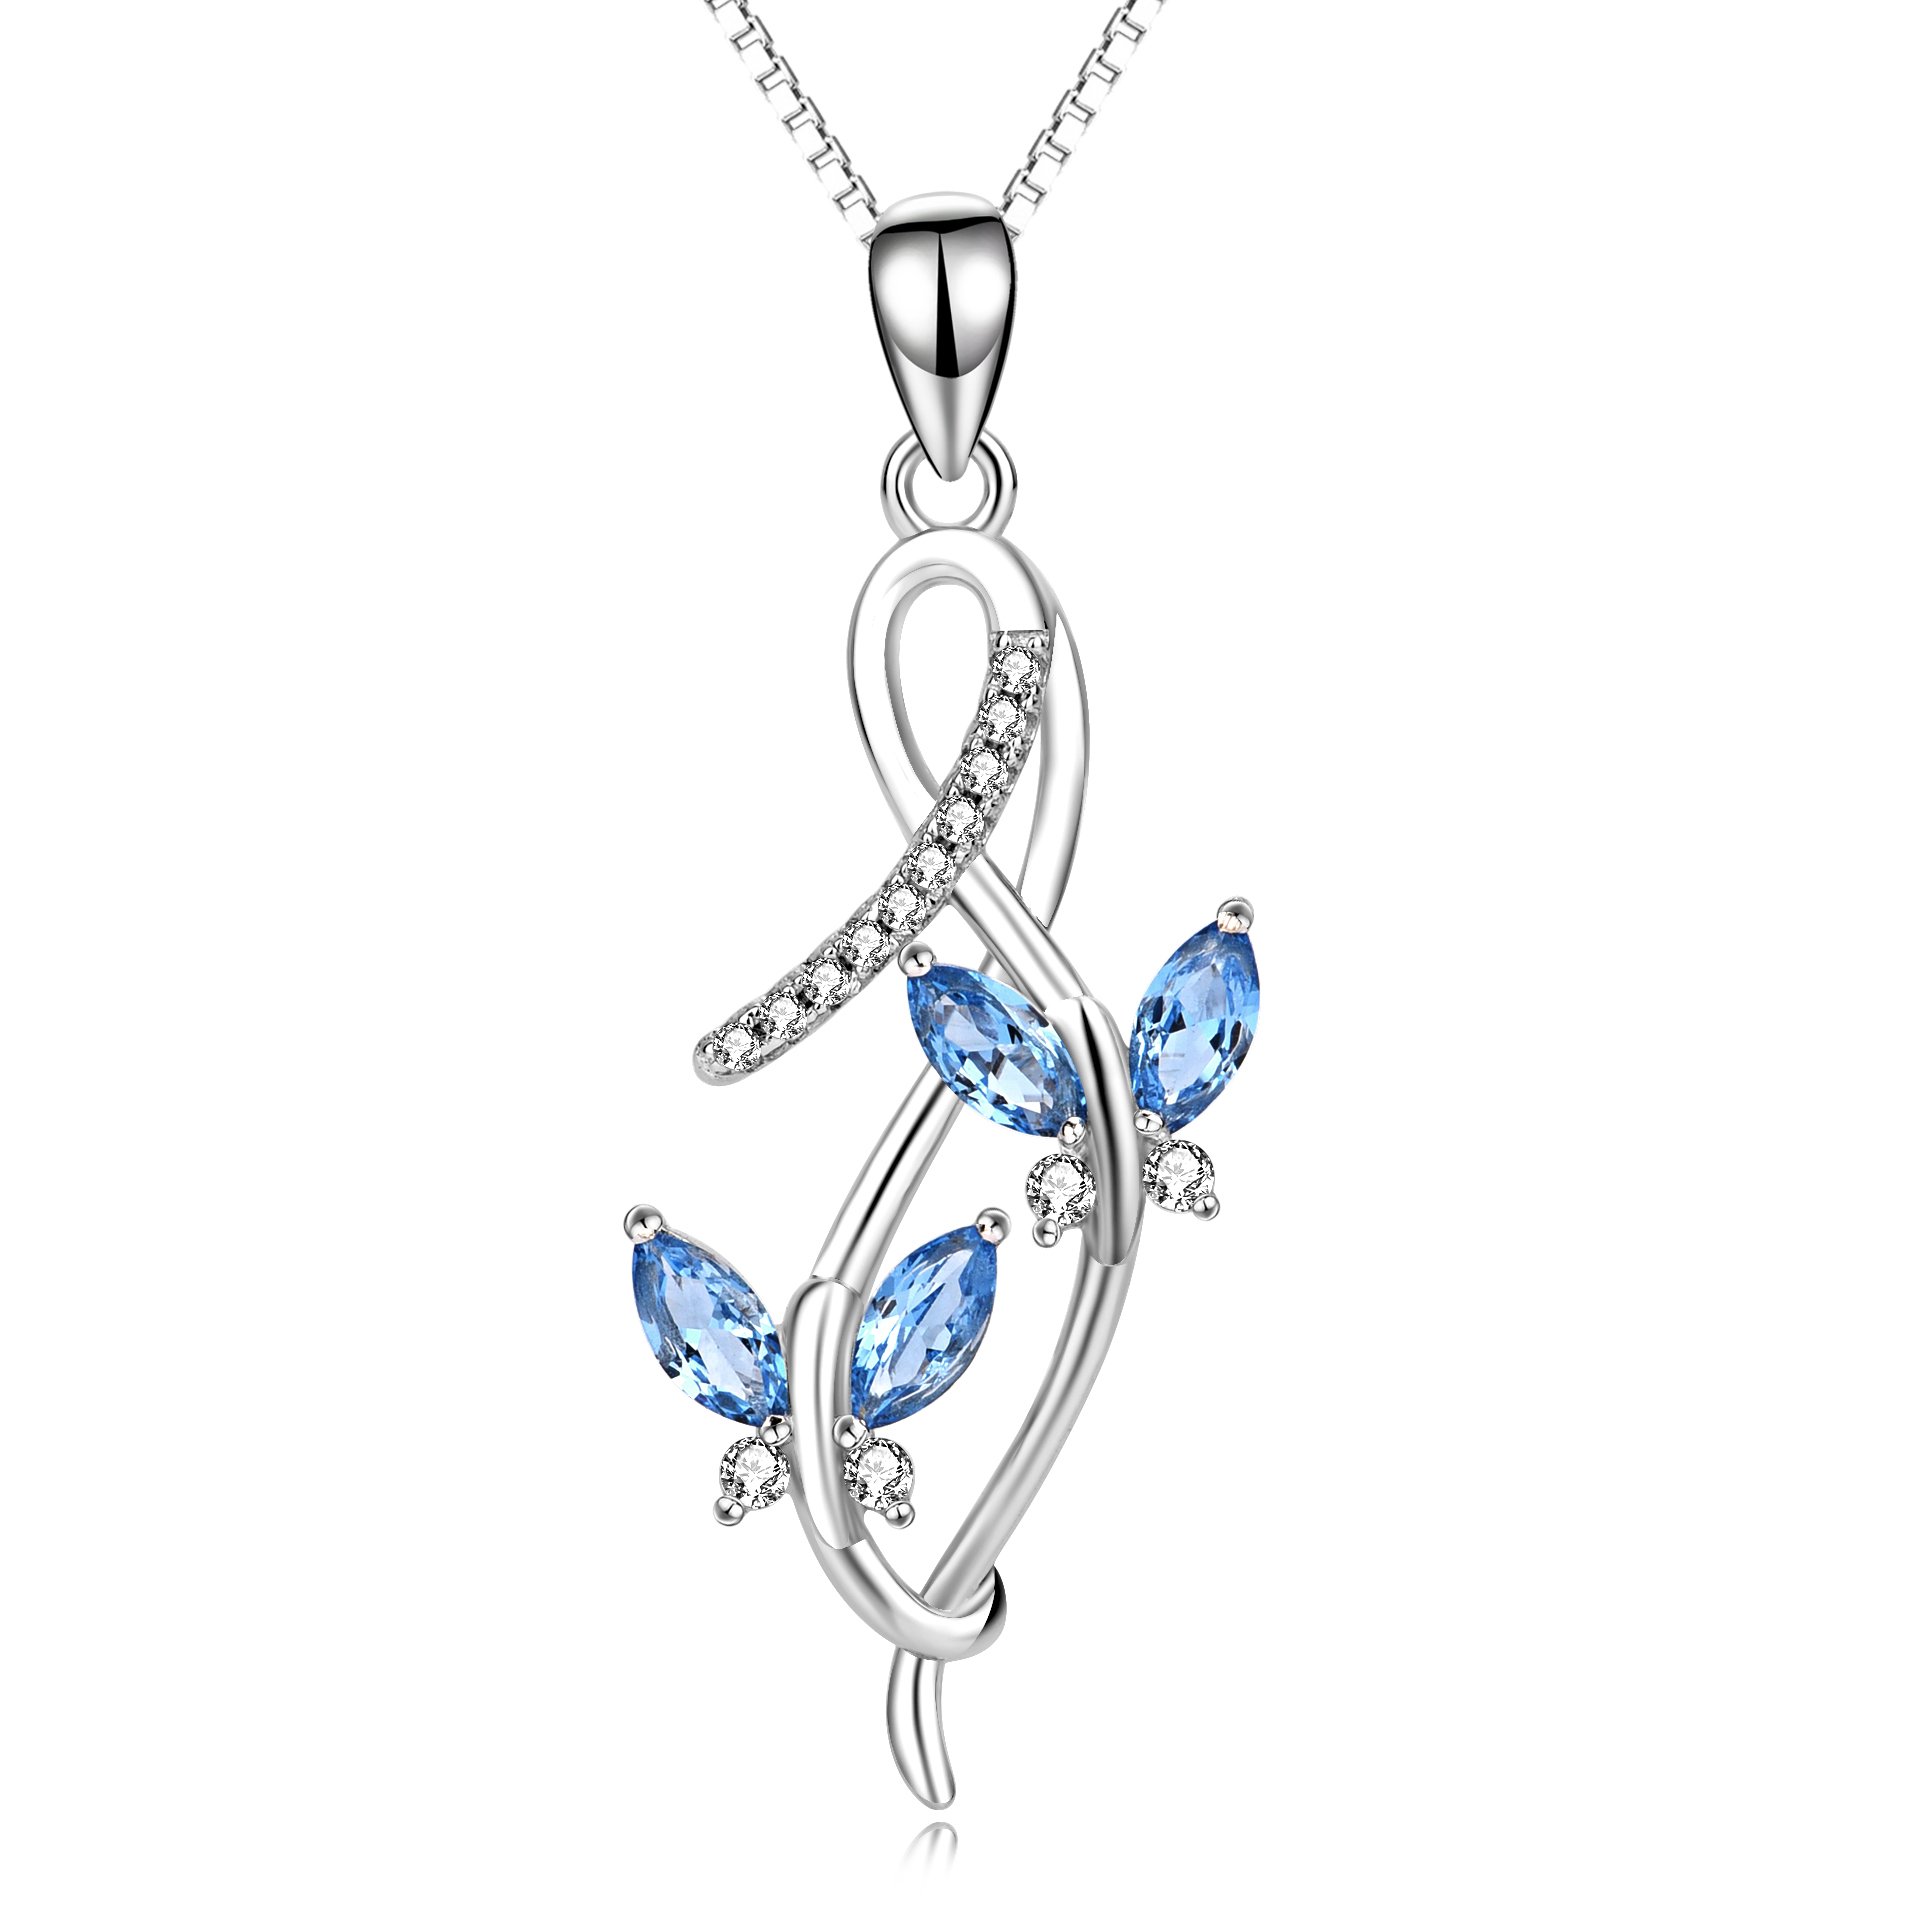 AOBOCO 925 Sterling Silver Butterfly Series Necklace, Valentine Jewelry Gifts for Women